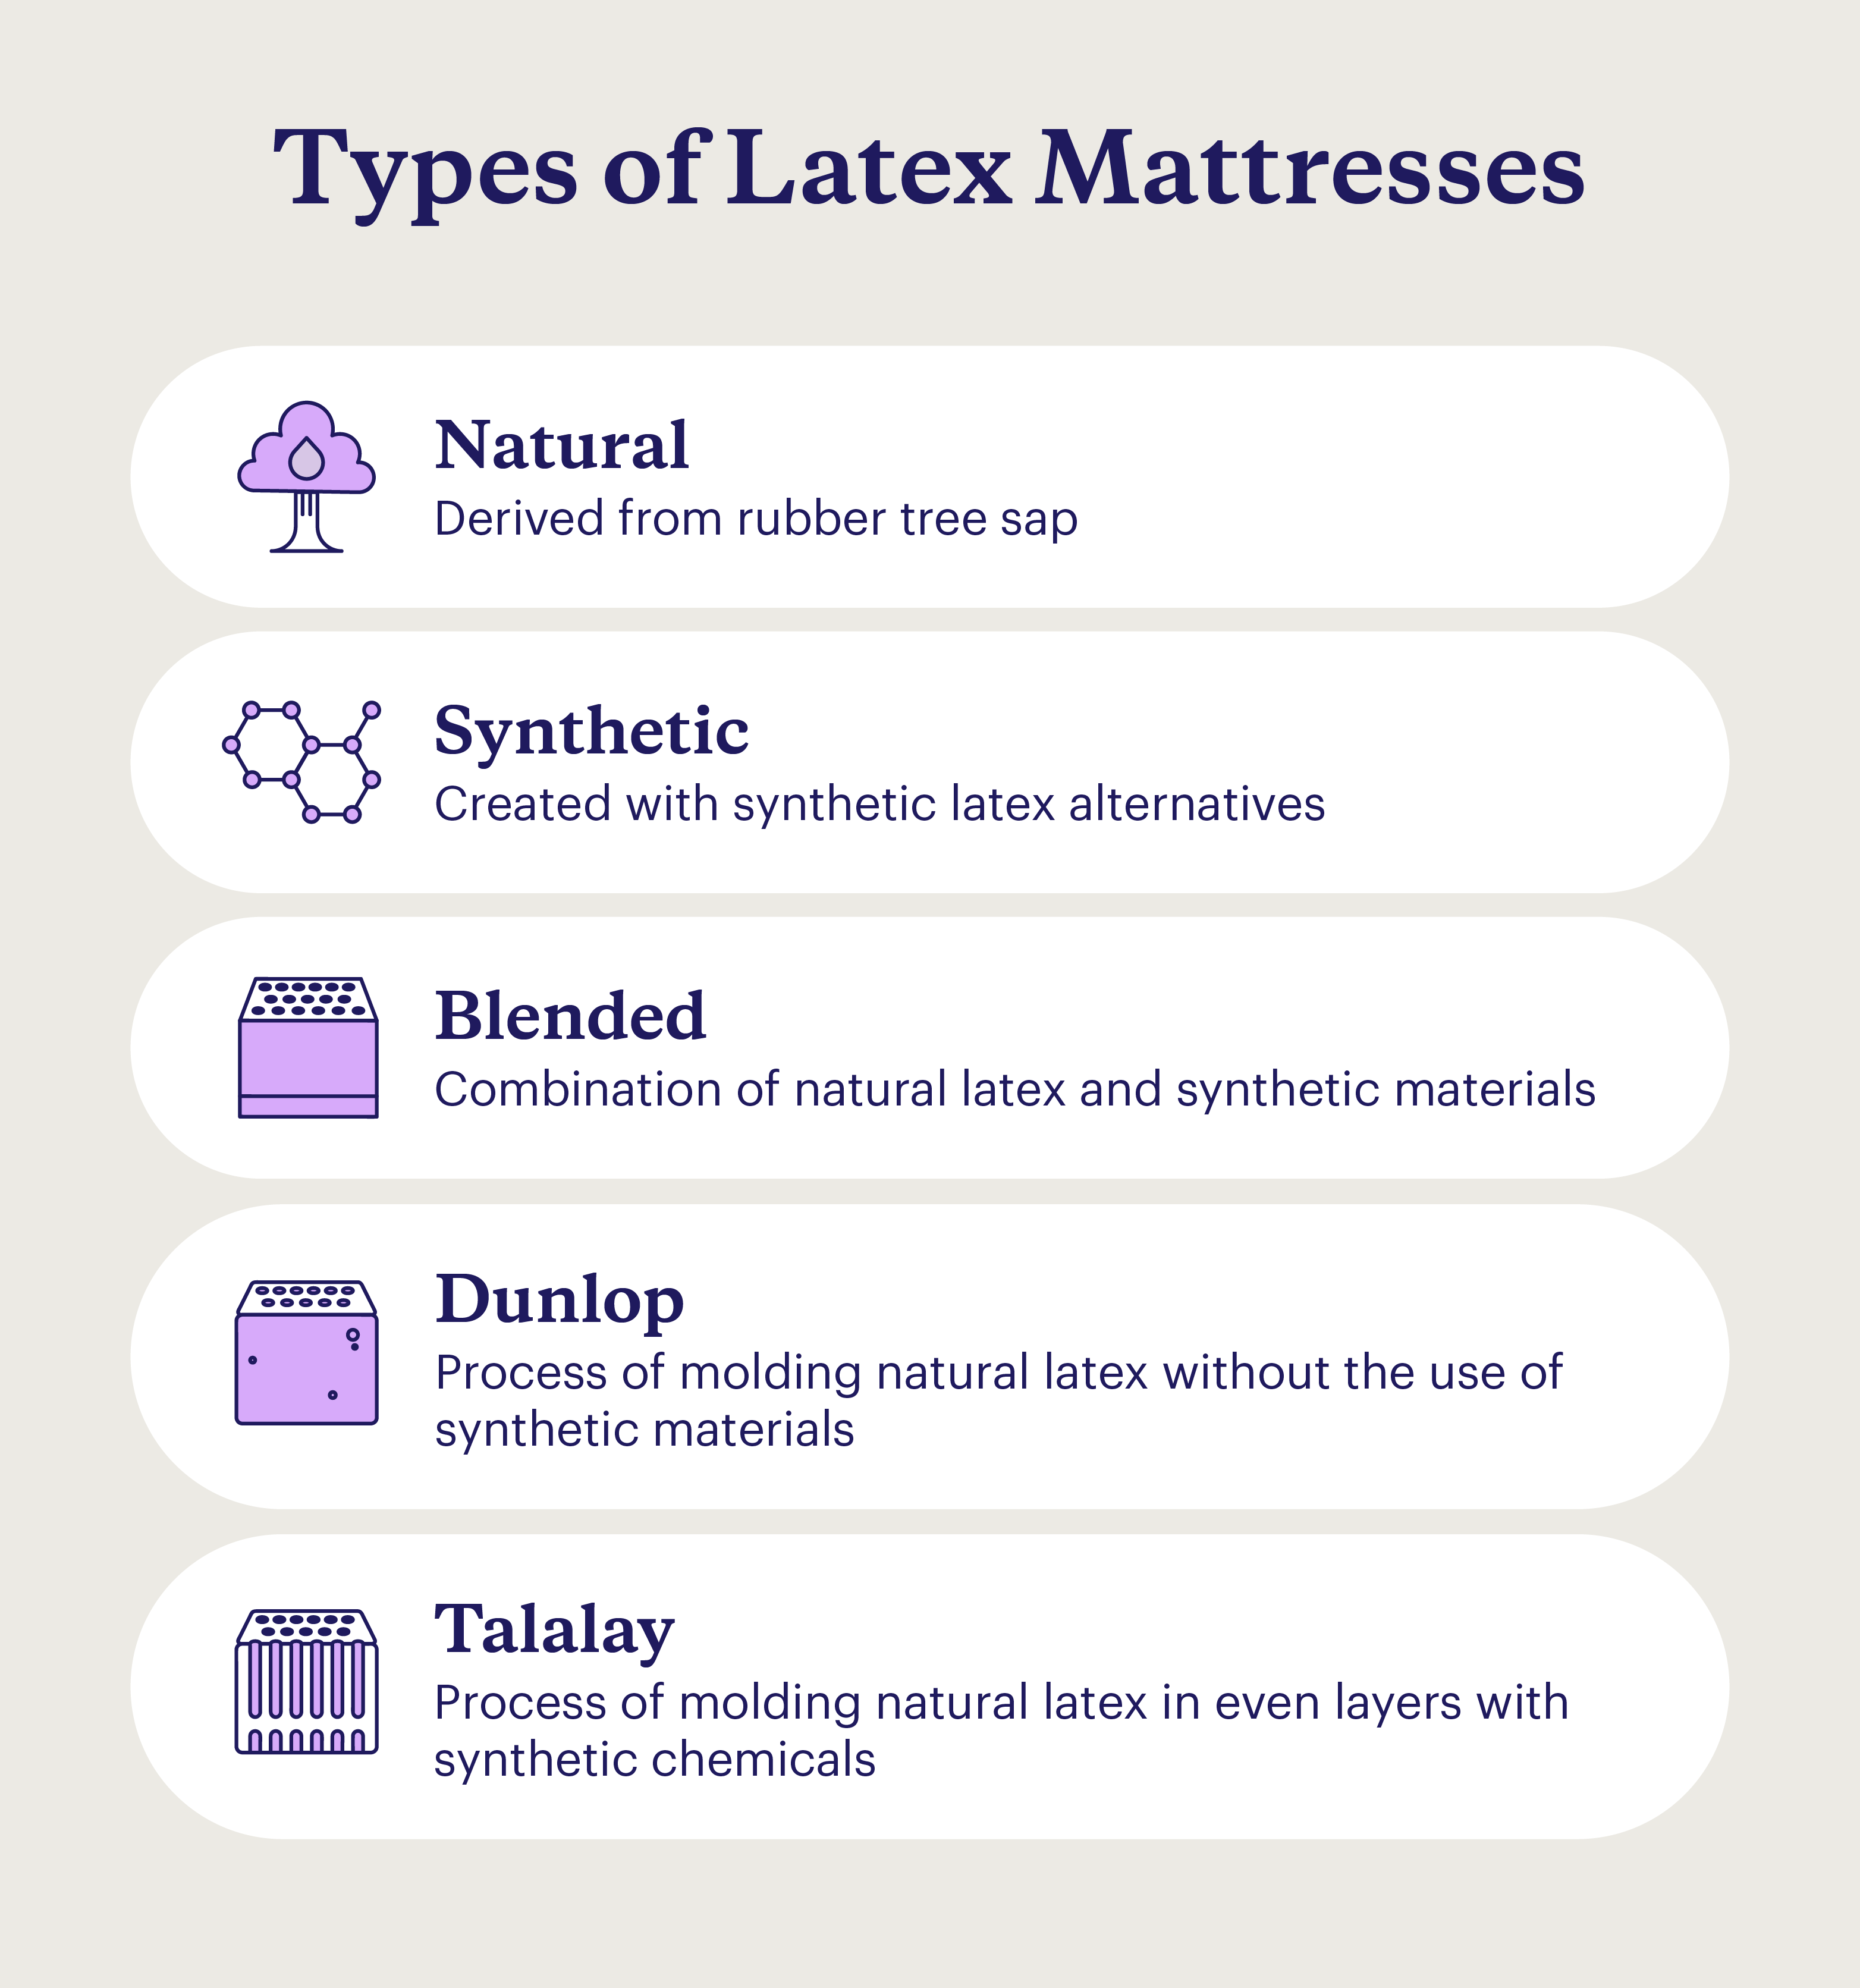 Graphic describing five types of latex mattresses, including natural, synthetic, blended, Dunlop, and Talalay.